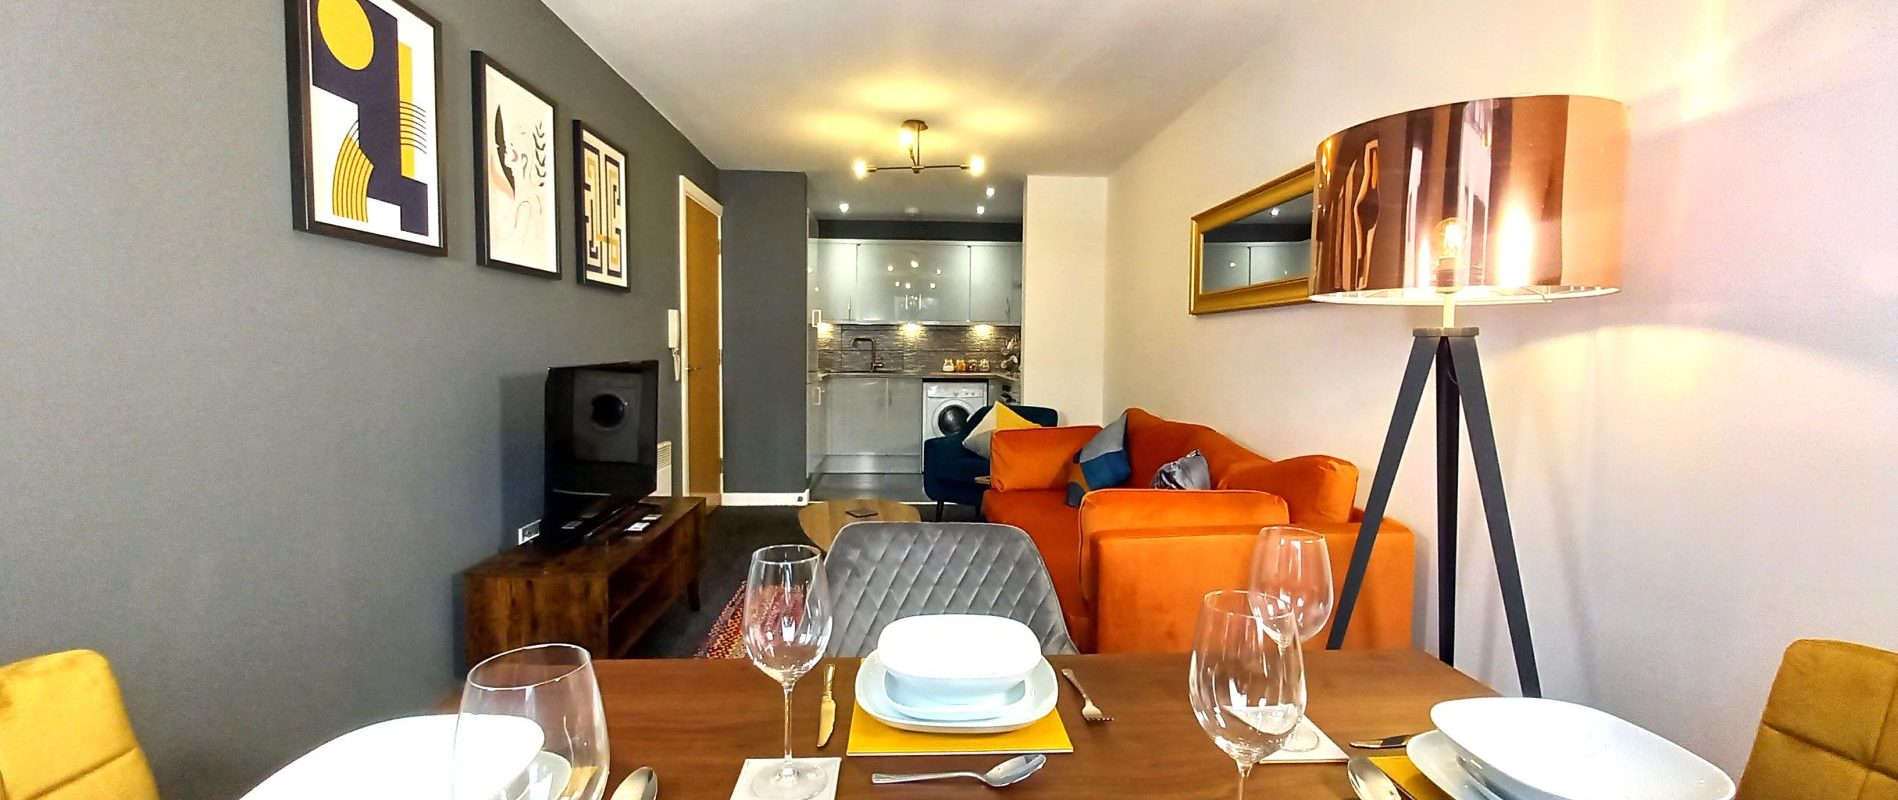 LUXURY SERVICED 2 BEDROOMS WITH 2 BATHROOMS APARTMENTS AVAILABLE